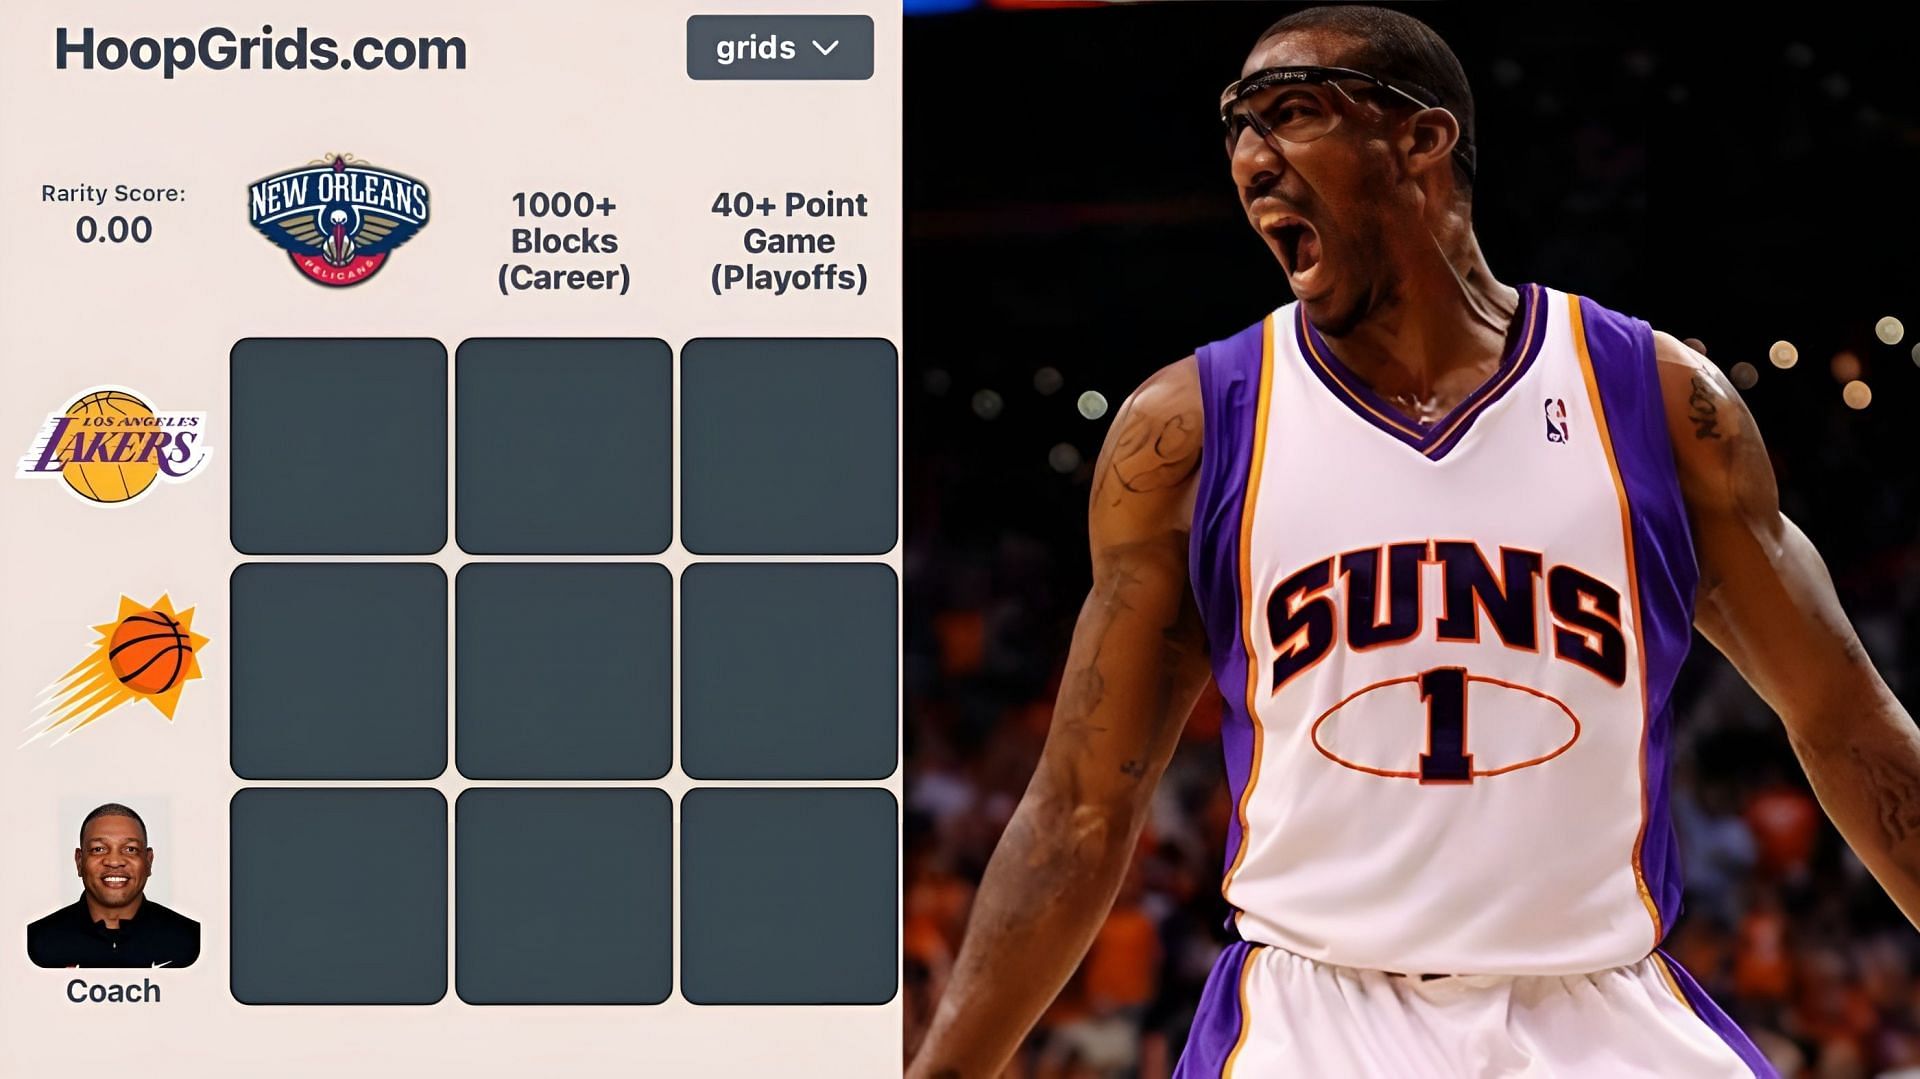 Which Suns players have recorded 1000+ career blocks and have scored 40+ points in a playoff game? NBA HoopGrids answers for August 11